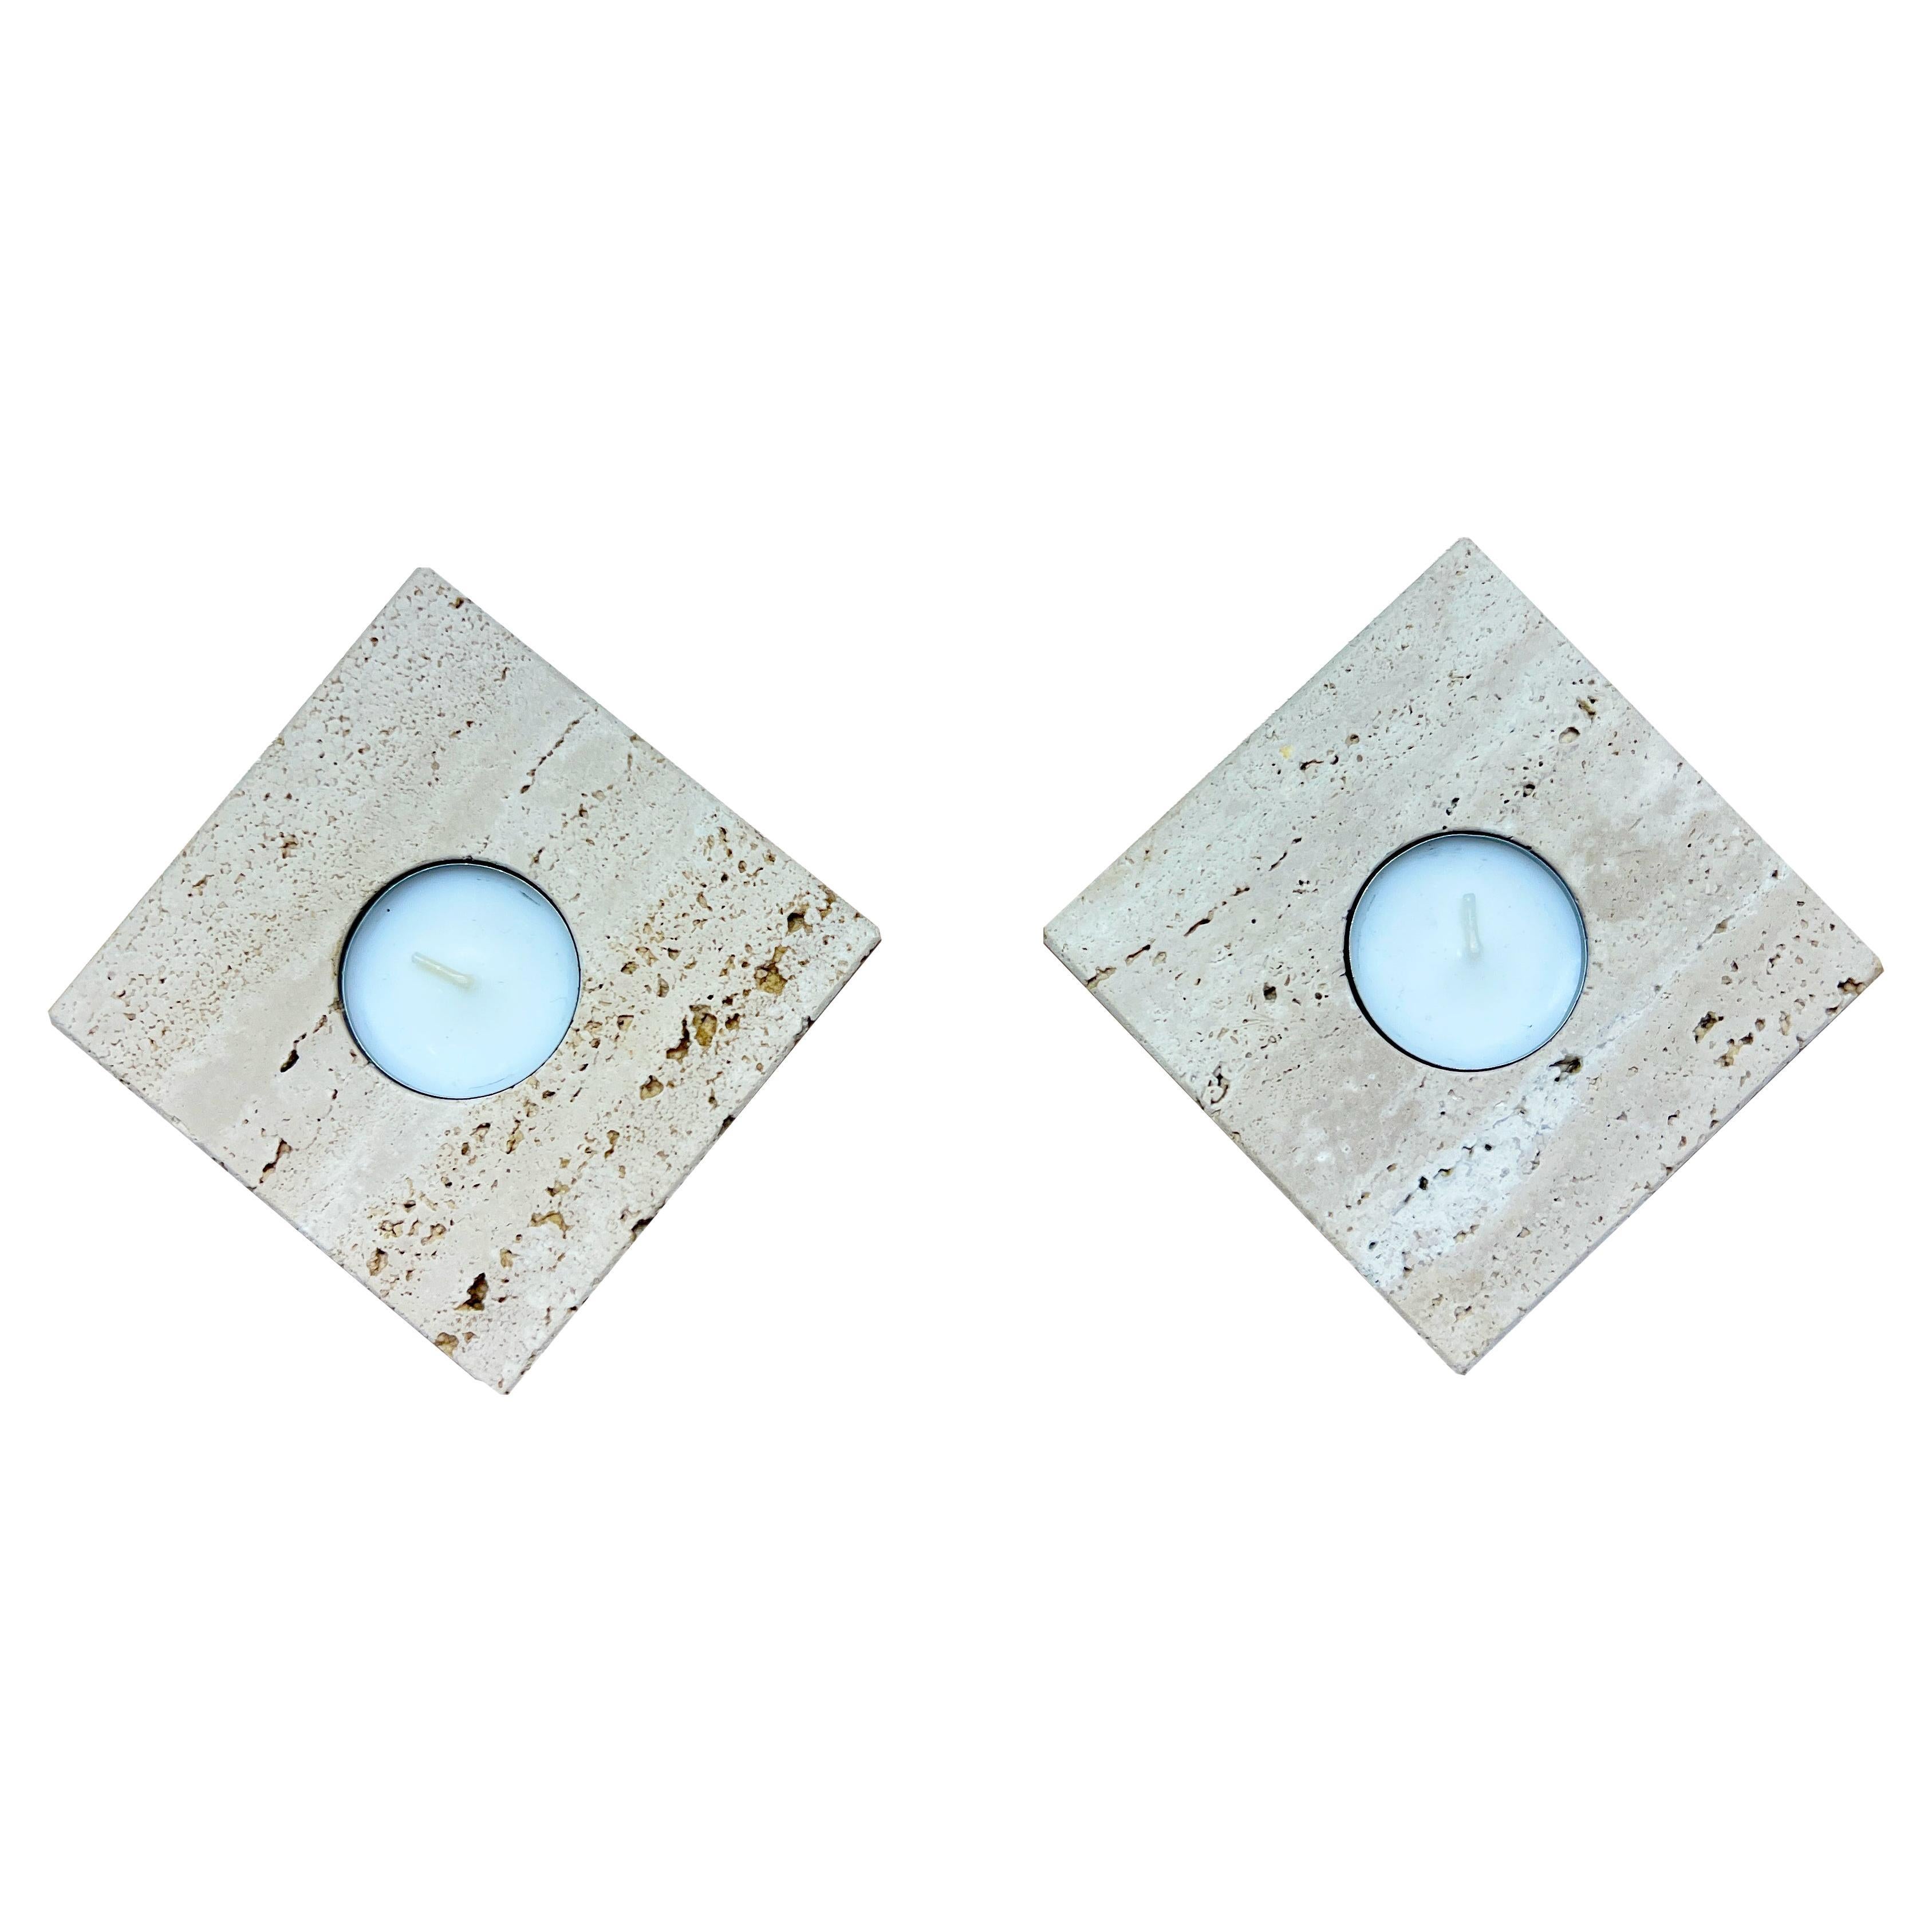 Candleholders Marble Travertine Design Set Two Candle Holders Mother’s Day Gift For Sale